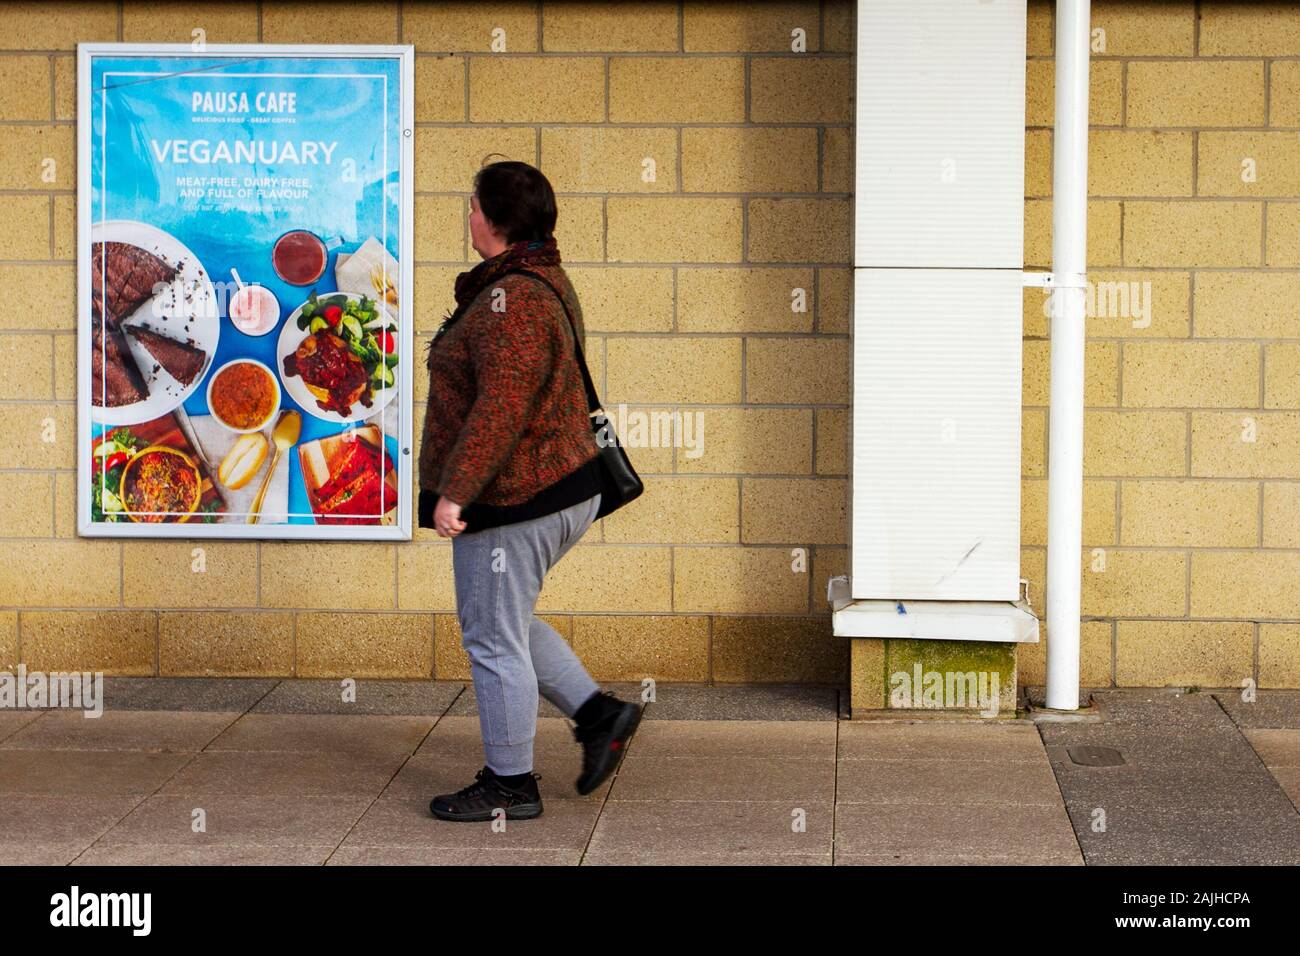 Vegetarianism, vegan, vegetarian, veganism, vegans diet foods; Seafront Retail Park in Southport, UK. January 'Veganuary' sales under way as shoppers search for bargains. Vegan poster advertises Vegan meals in the Dunelm Pausa cafe. Stock Photo